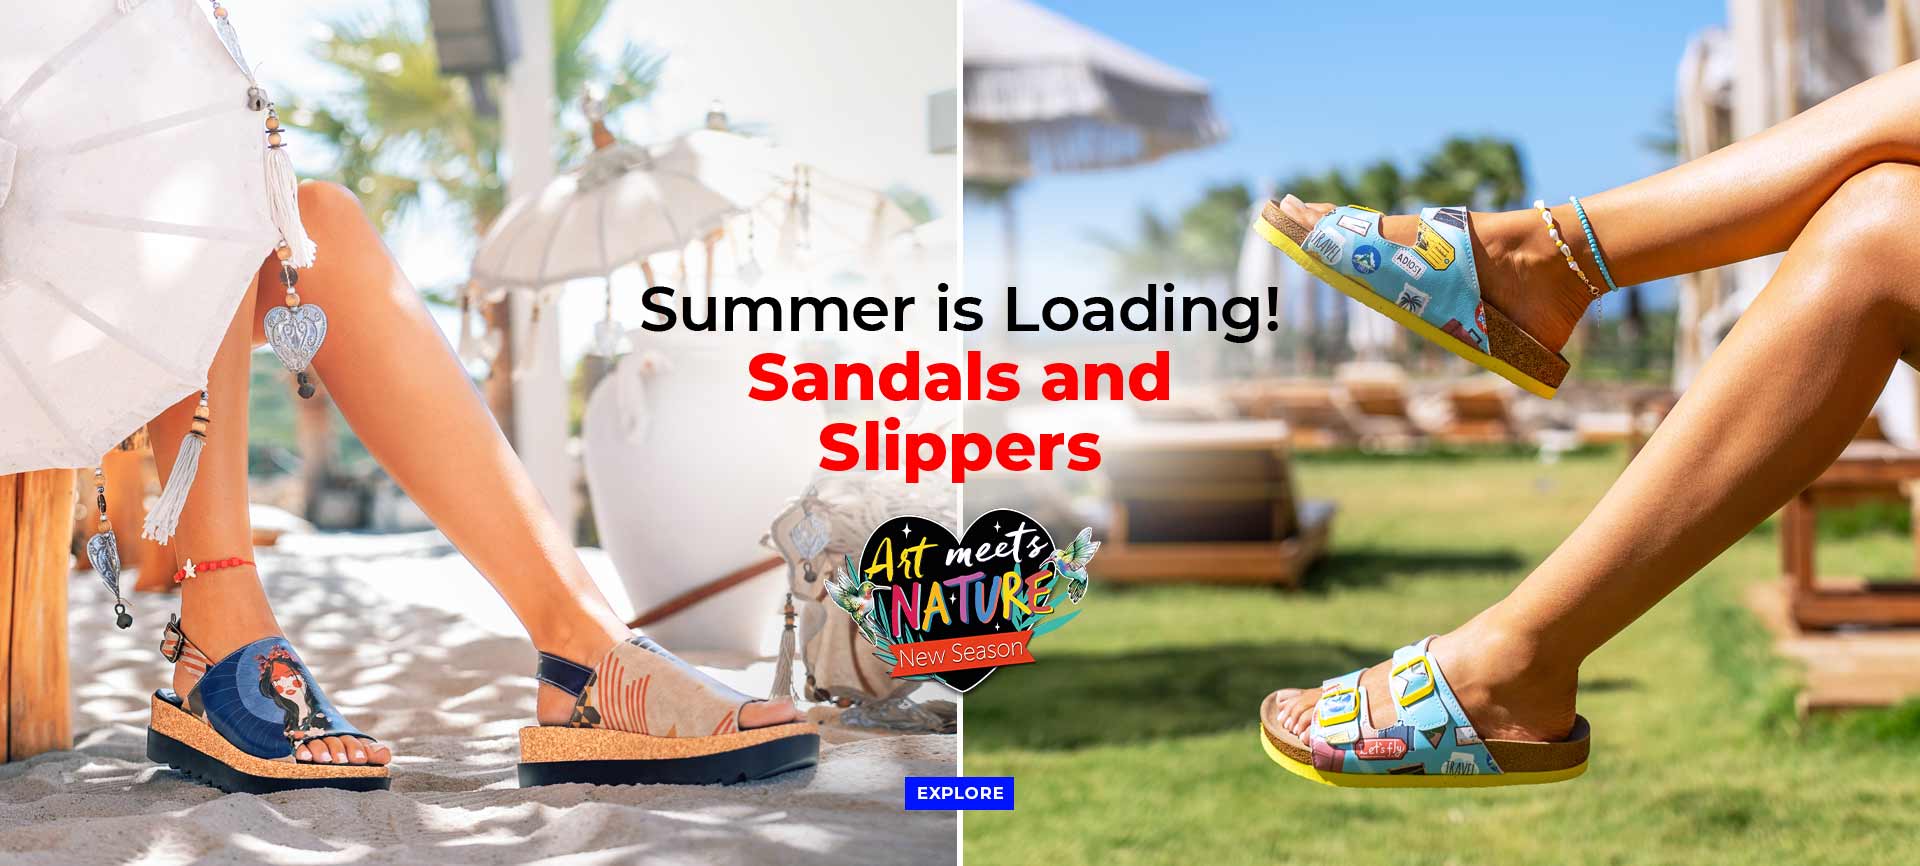 summer is loading! sandals and slippers